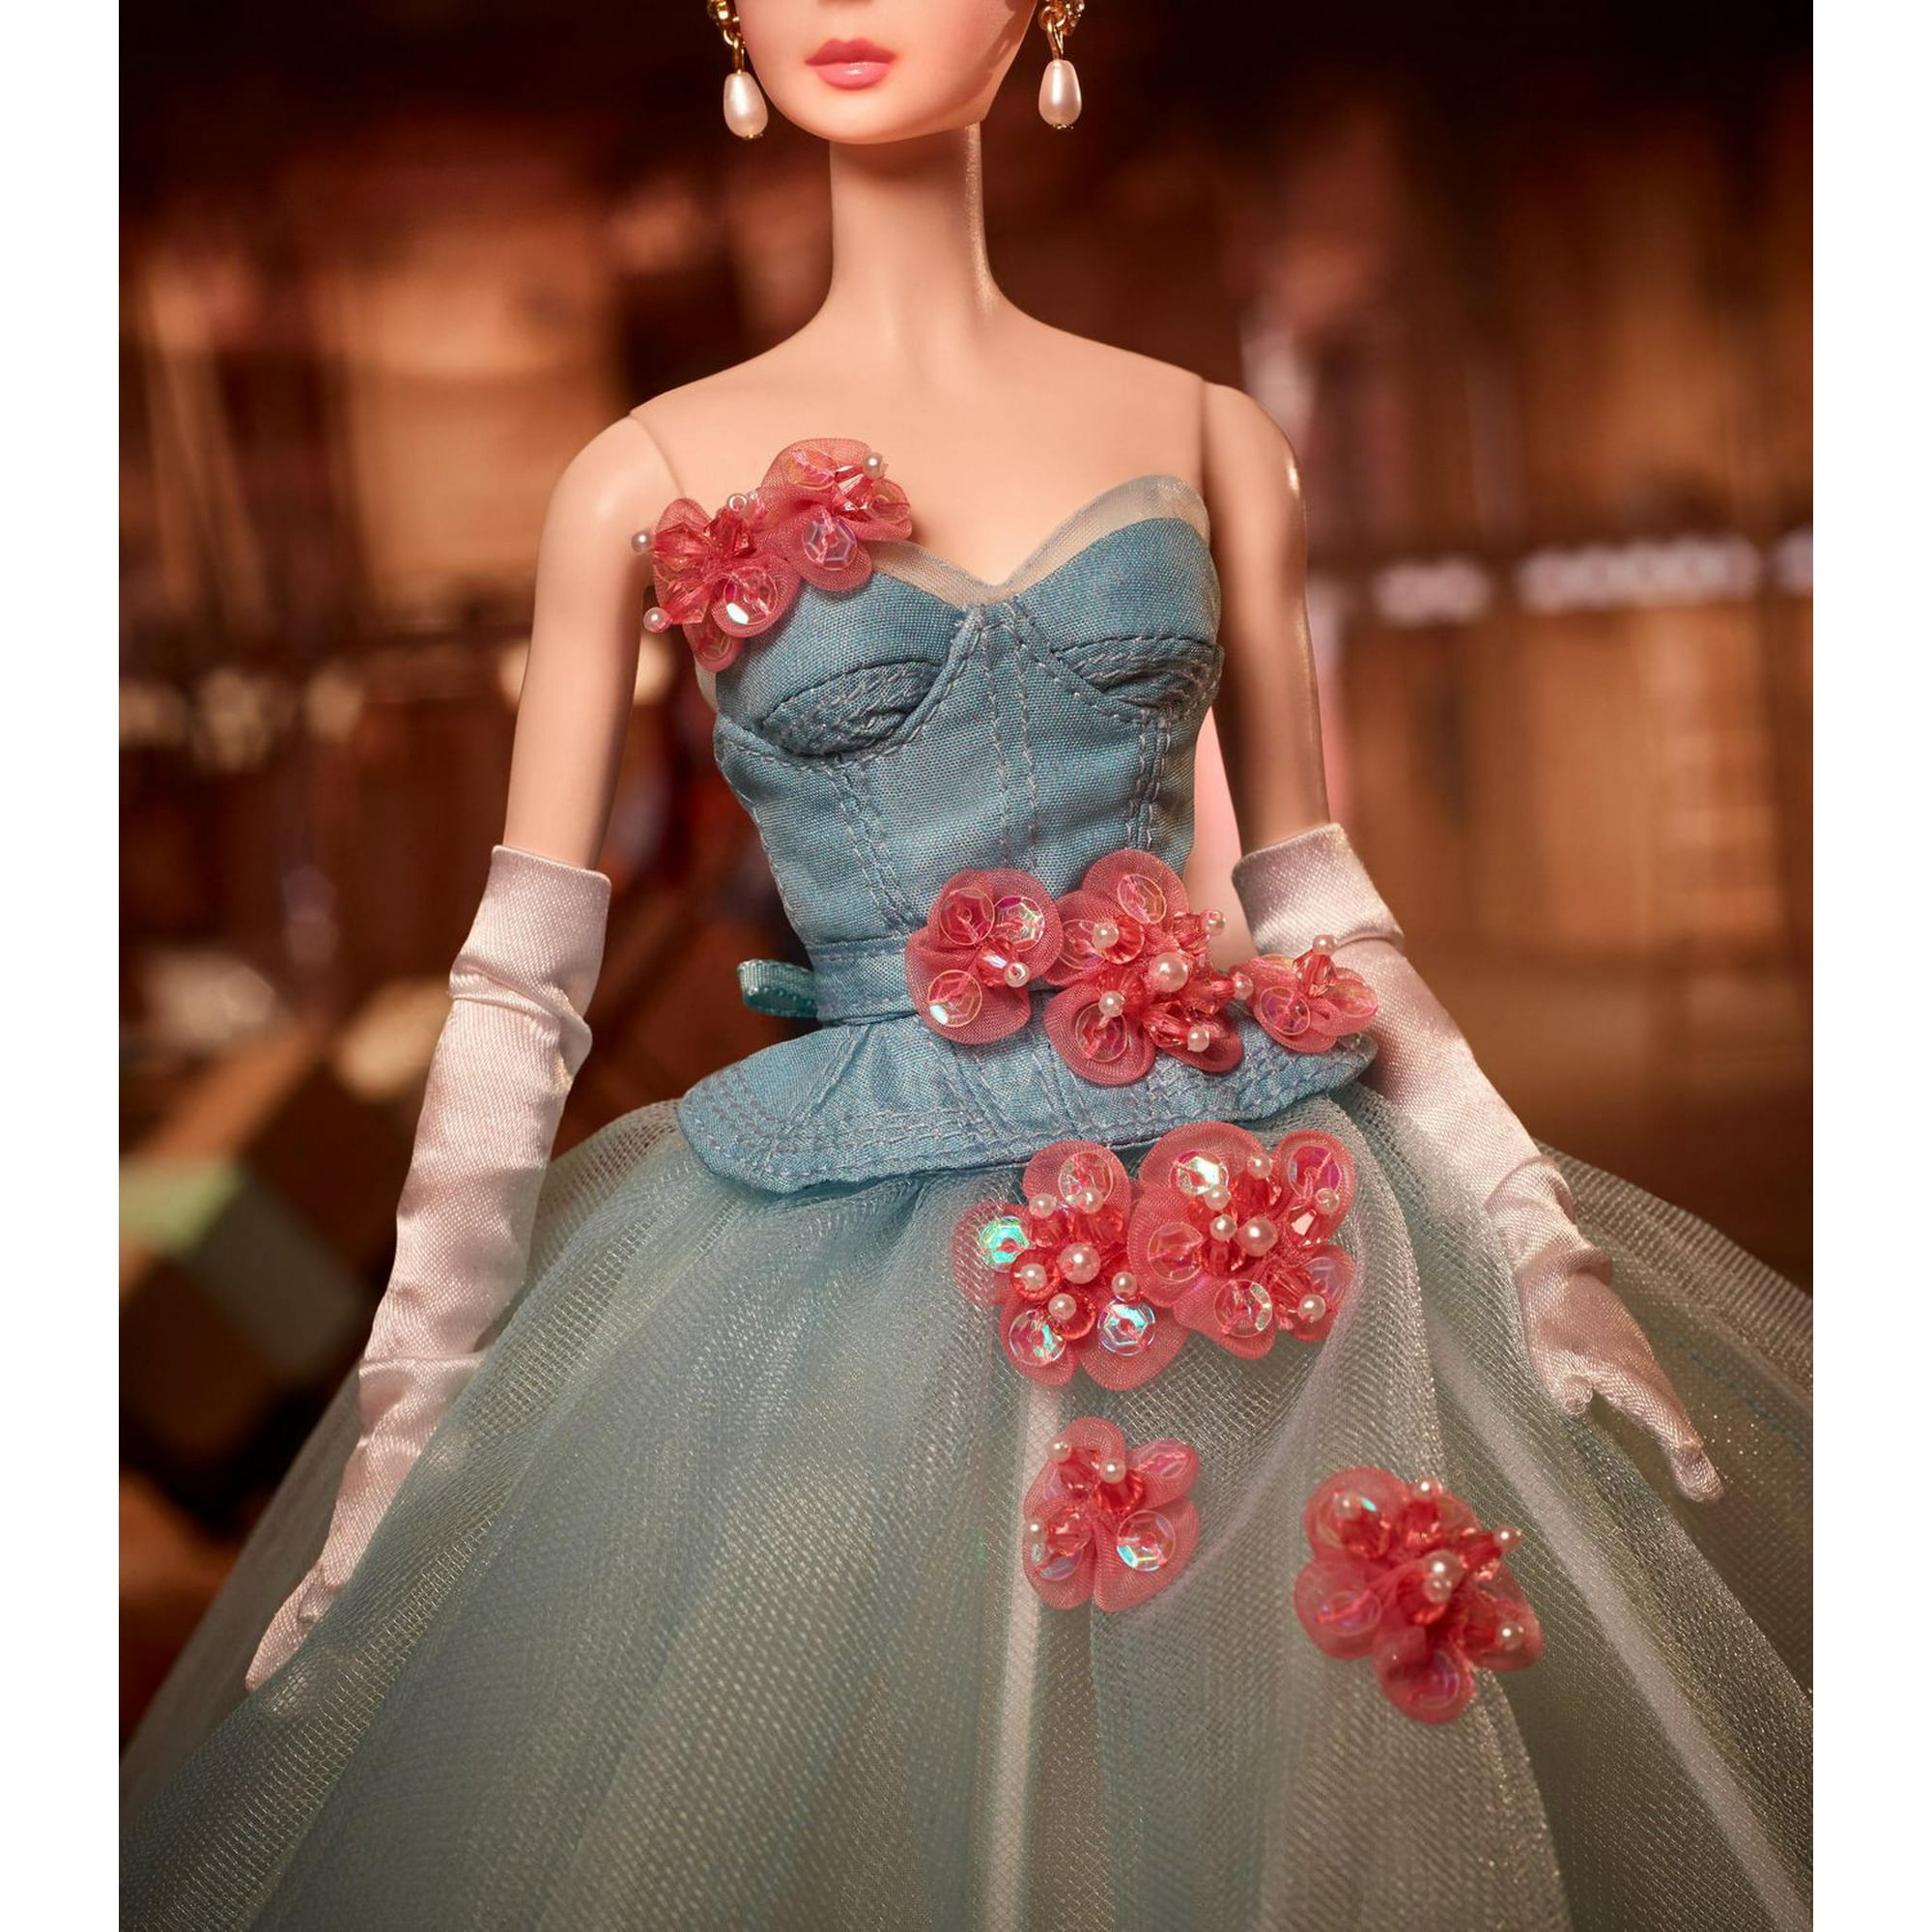  Barbie Fashion Model Collection The Gala's Best Doll, 13.5-in  Signature Doll with Silkstone Body in Blue Gown, with Certificate of  Authenticity : Toys & Games